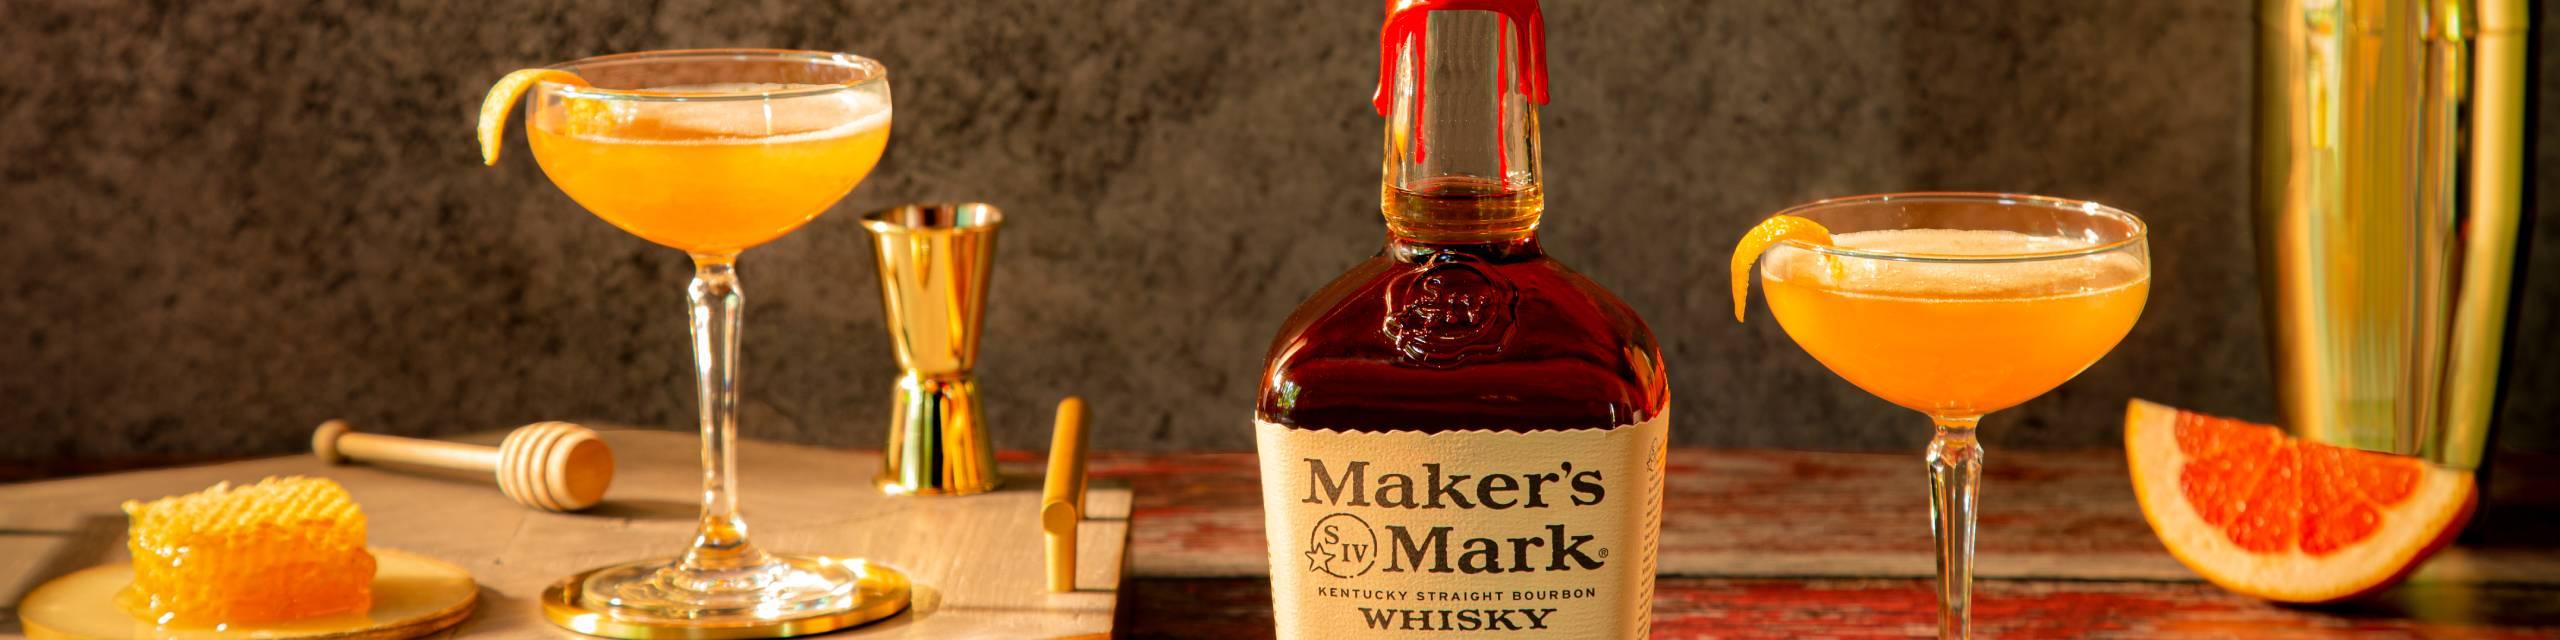 Created by Bill Samuels, Sr. to be a bourbon that he would enjoy drinking himself, Maker’s Mark® is smooth and approachable with an easy finish – a true contrast to hot, harsh whiskies that “blow your ears off,” and a downright revolutionary idea at the time. Maker’s Mark® is made slowly in small batches, in our National Historic Landmark distillery in Loretto, Kentucky. While it makes any cocktail better, a lot of folks still prefer it on its own, or over ice with a splash of water.

Buy Maker's Mark online now from nearby liquor stores via Minibar Delivery. 